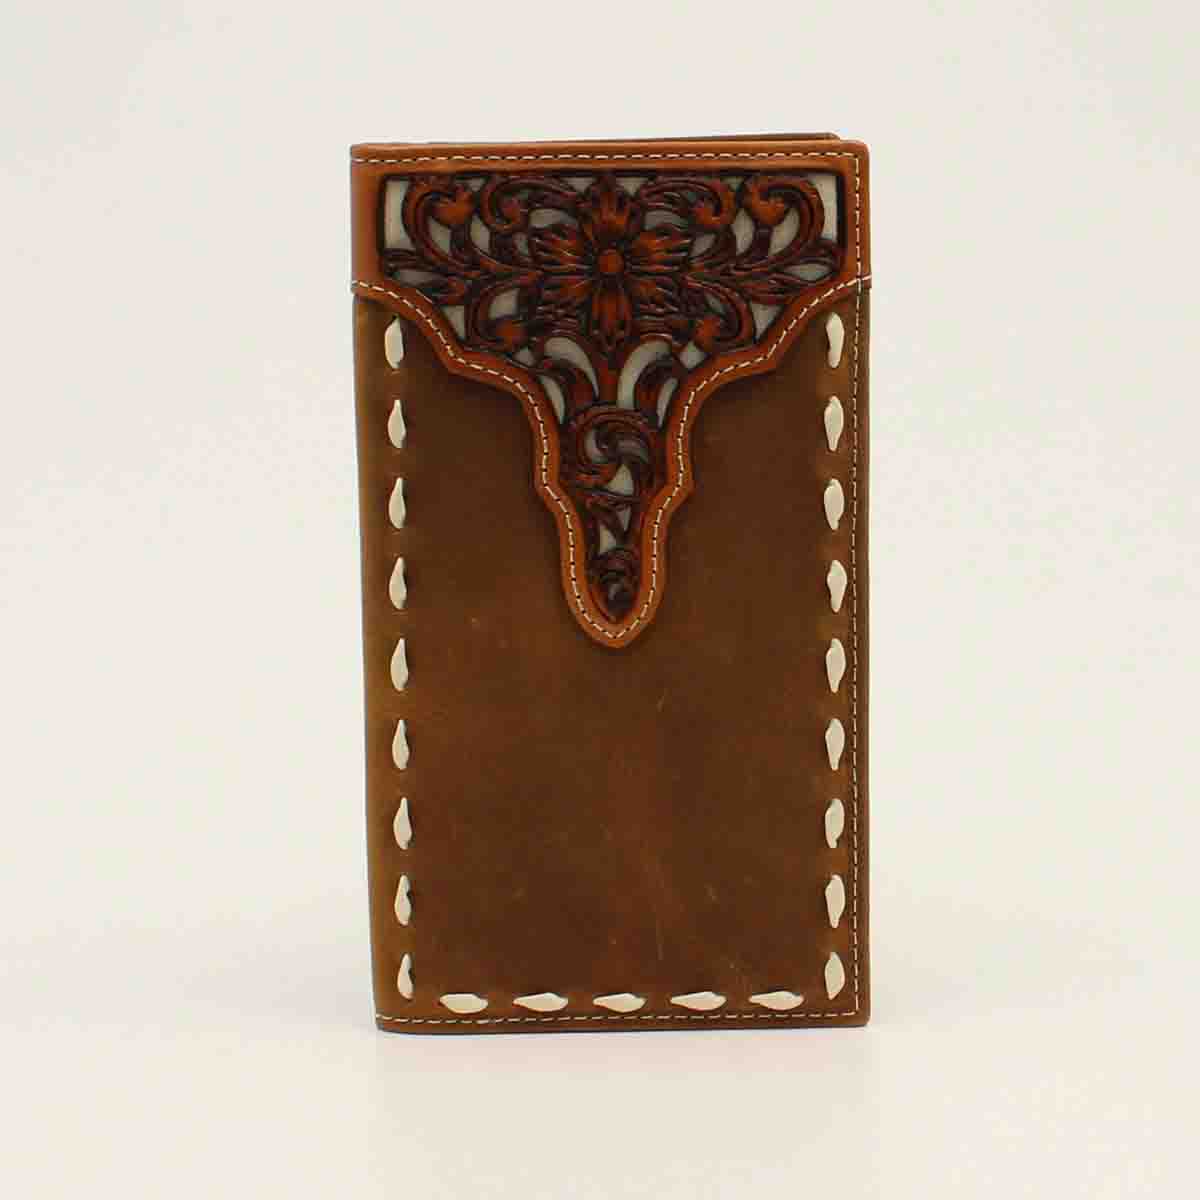 Ariat Rodeo Wallet Floral Tooled